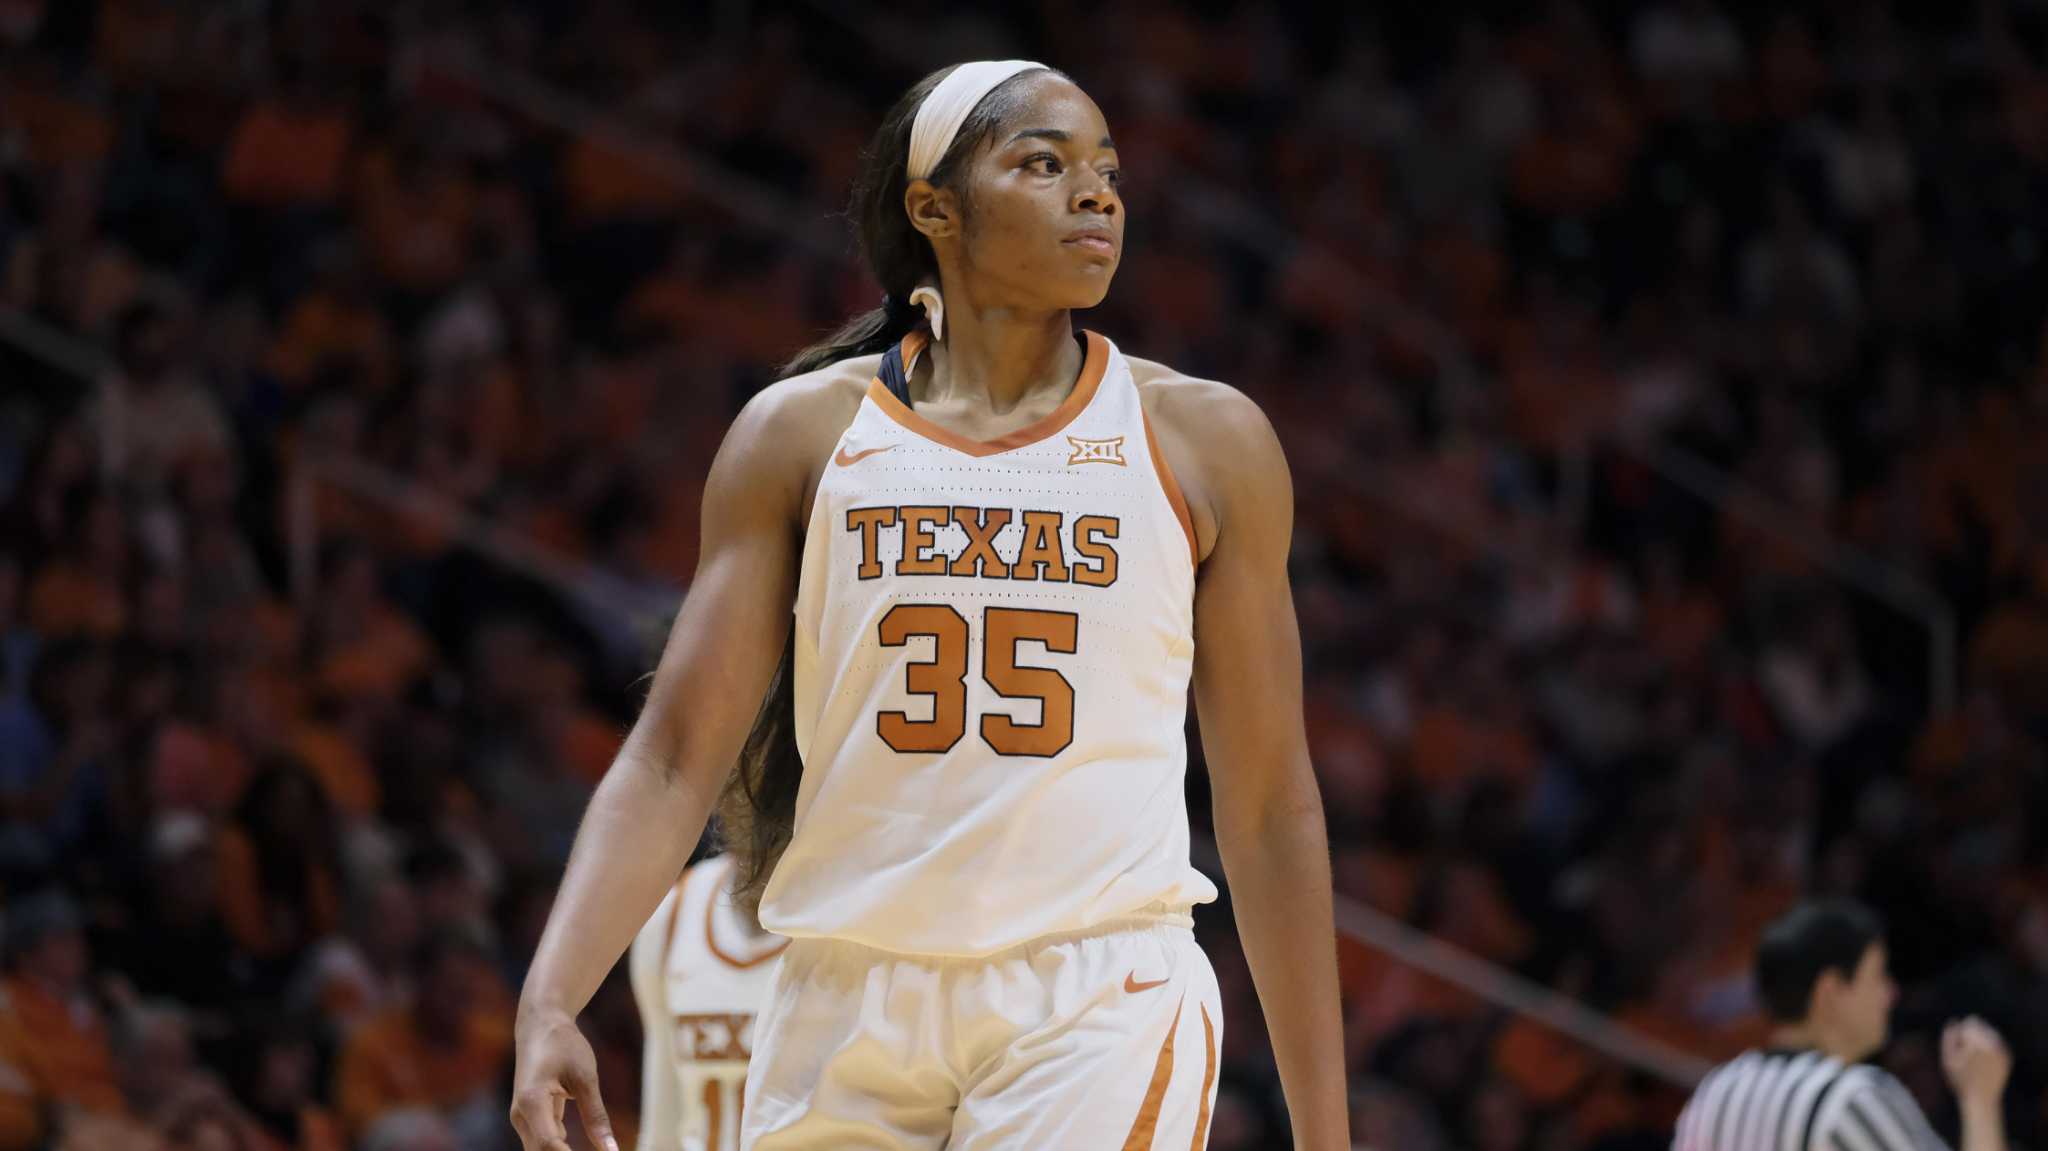 Texas basketball's Charli Collier launches COVID-19 relief effort.